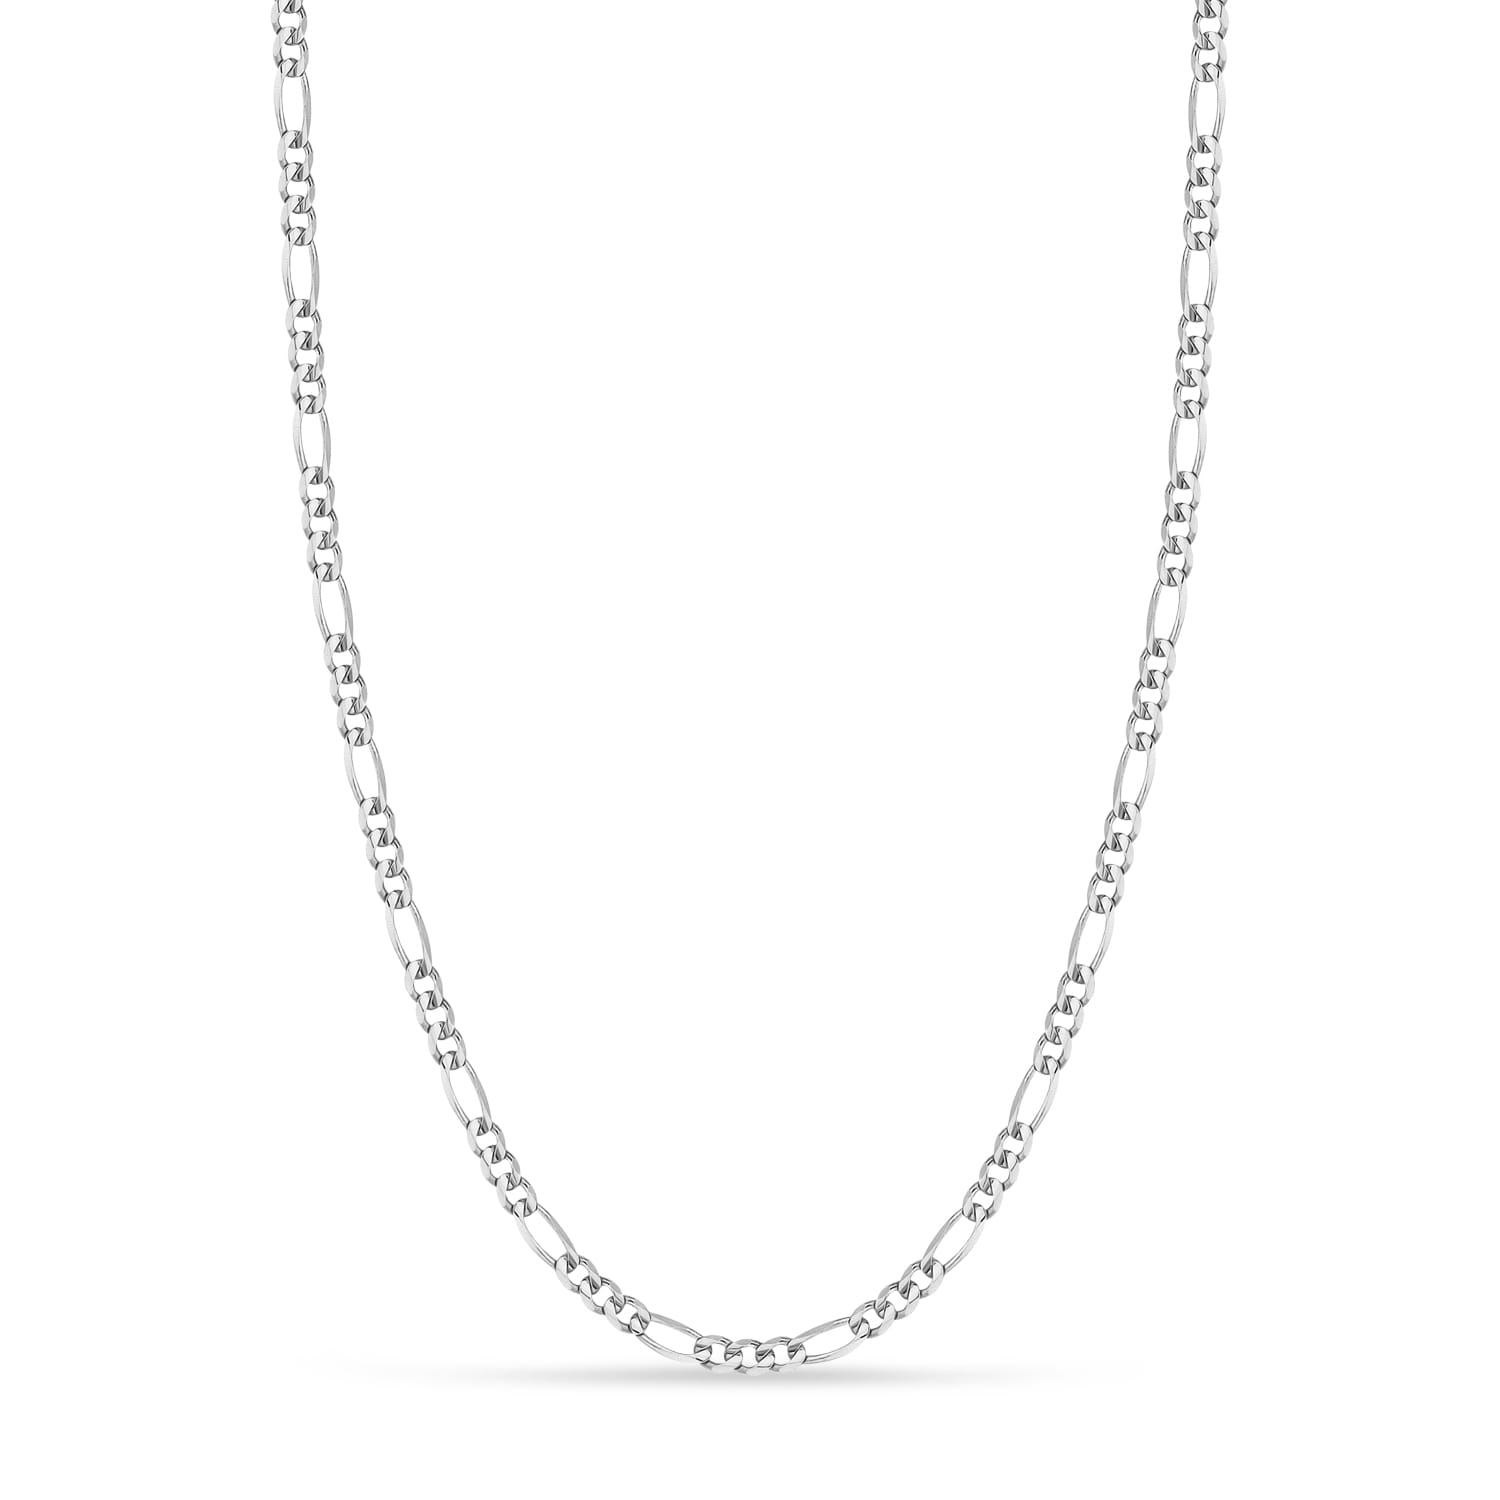 Figaro Chain Necklace With Lobster Lock 14k White Gold